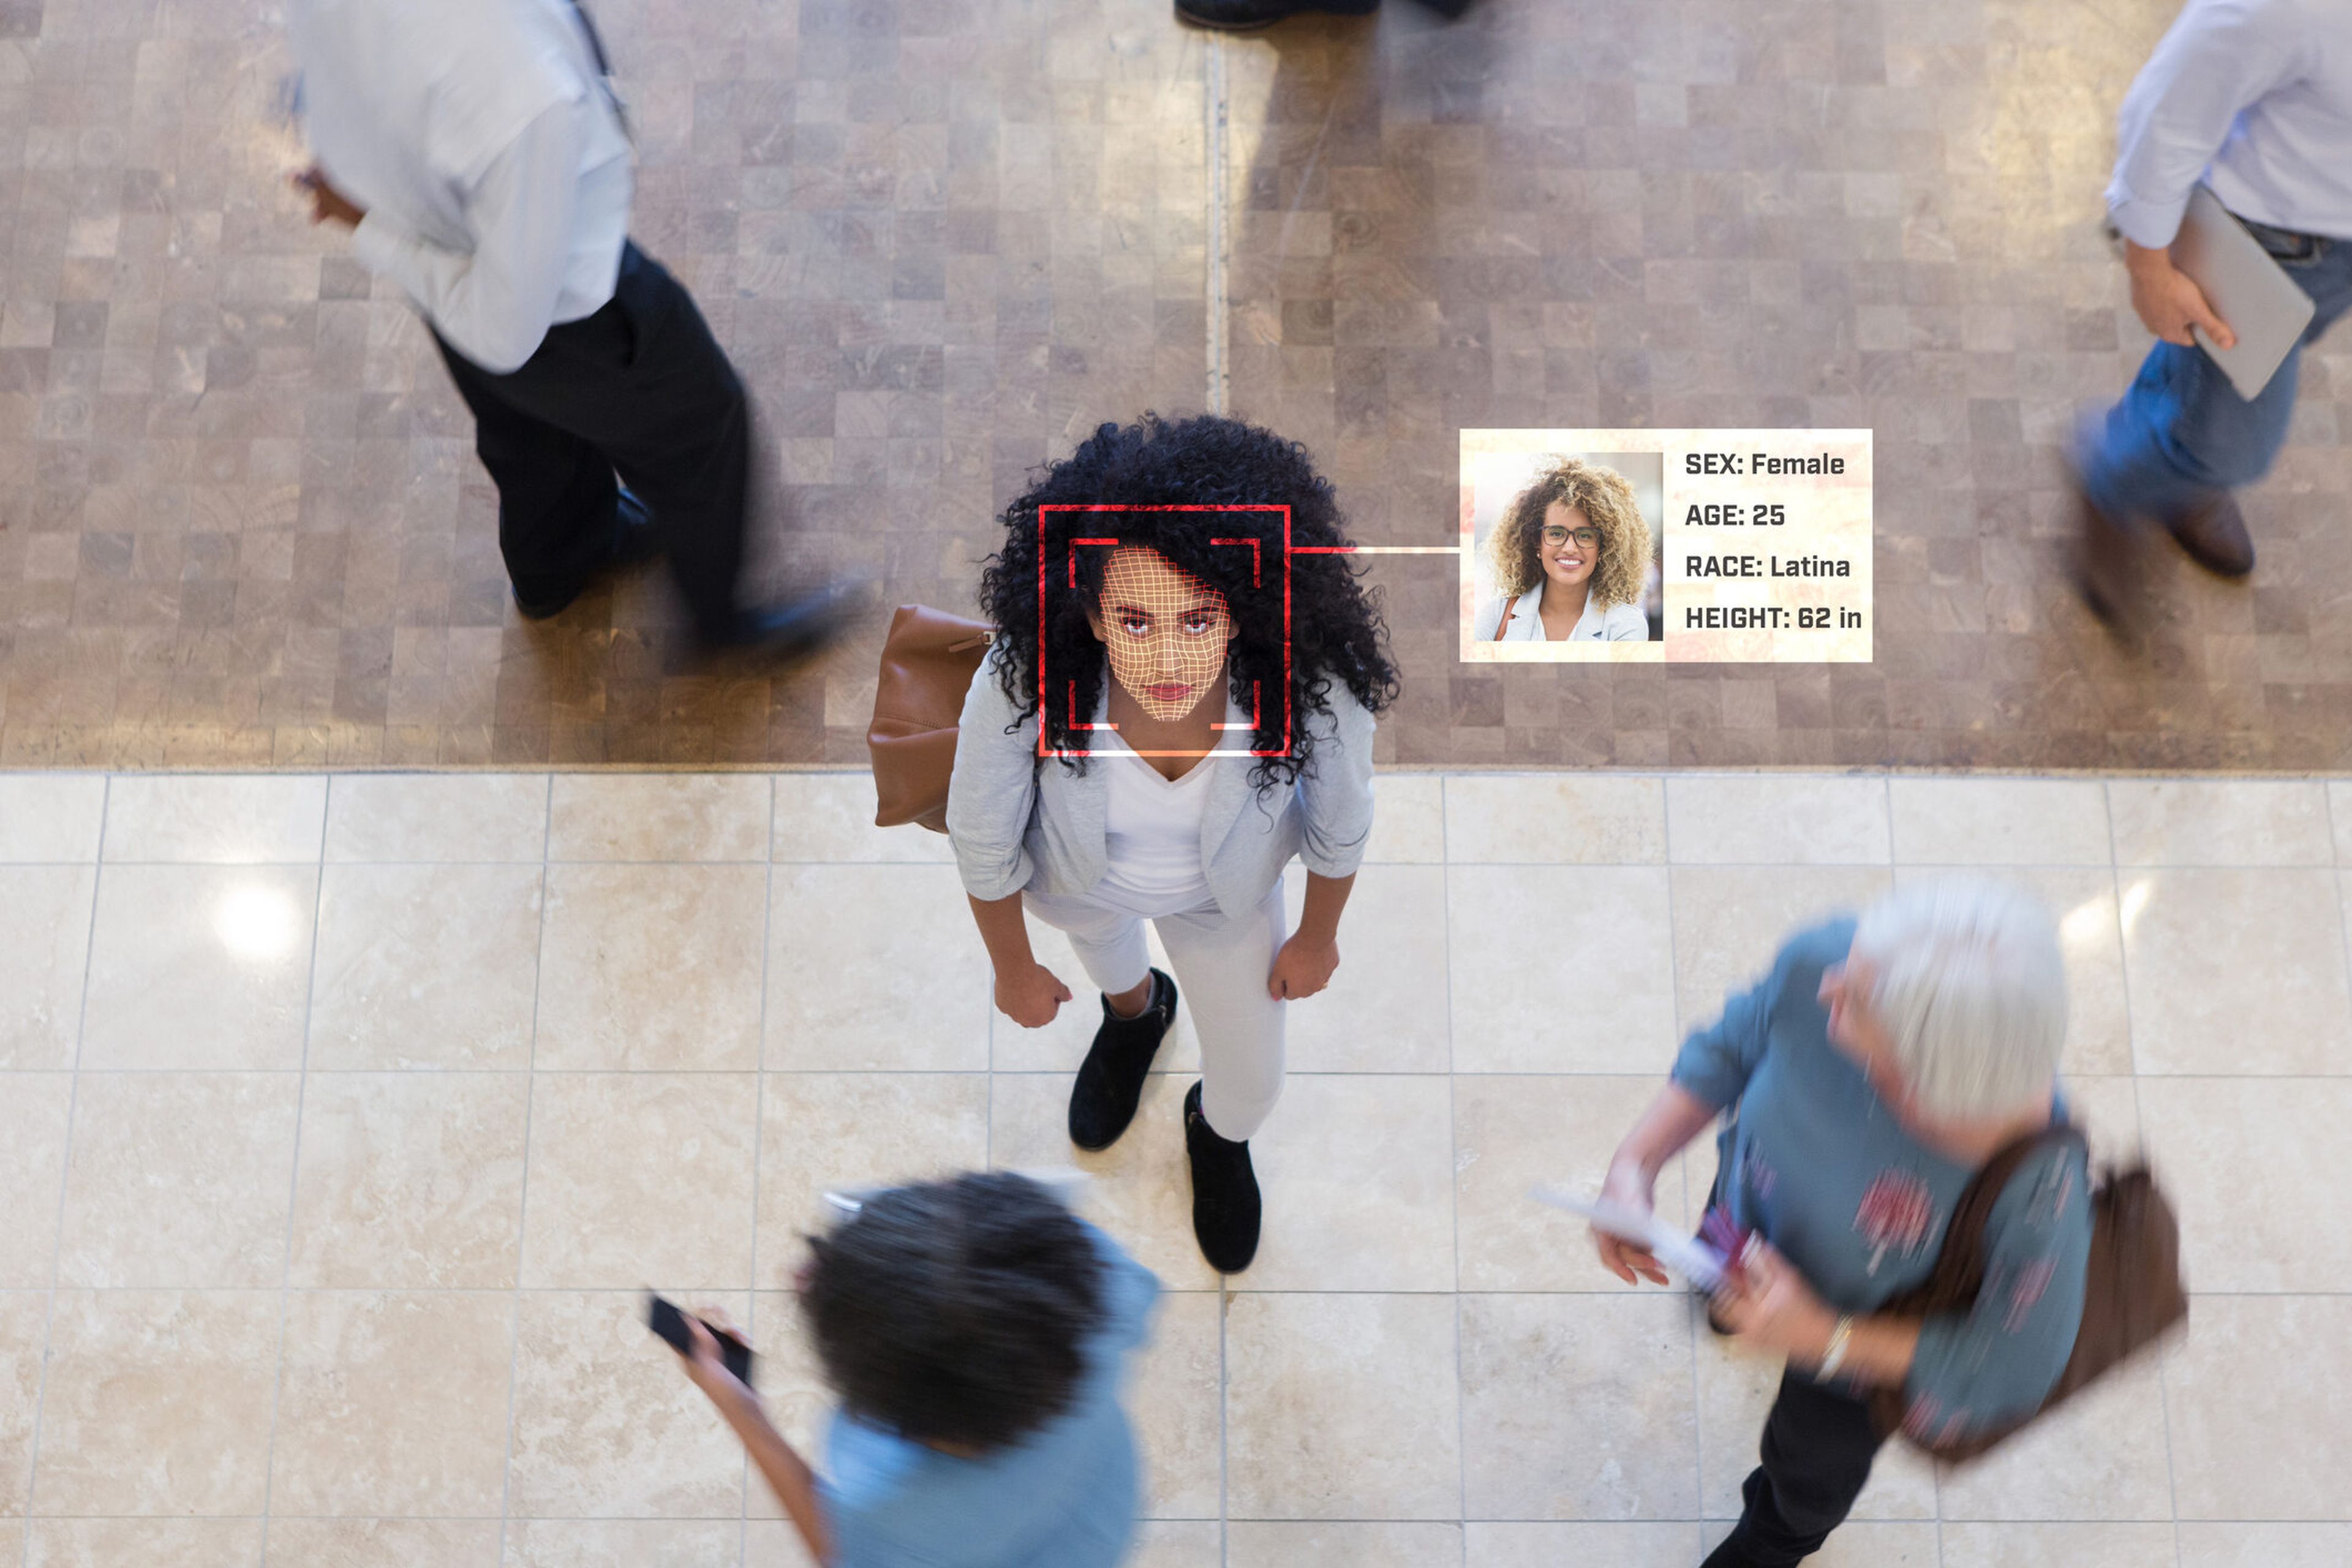 The GSA wants to determine if commercial facial recognition technologies can be incorporated into Login.gov. Pictured: A young Hispanic businesswoman looks up while in an office lobby with businesspeople all around her. (Image credit: SDI Productions via Getty)